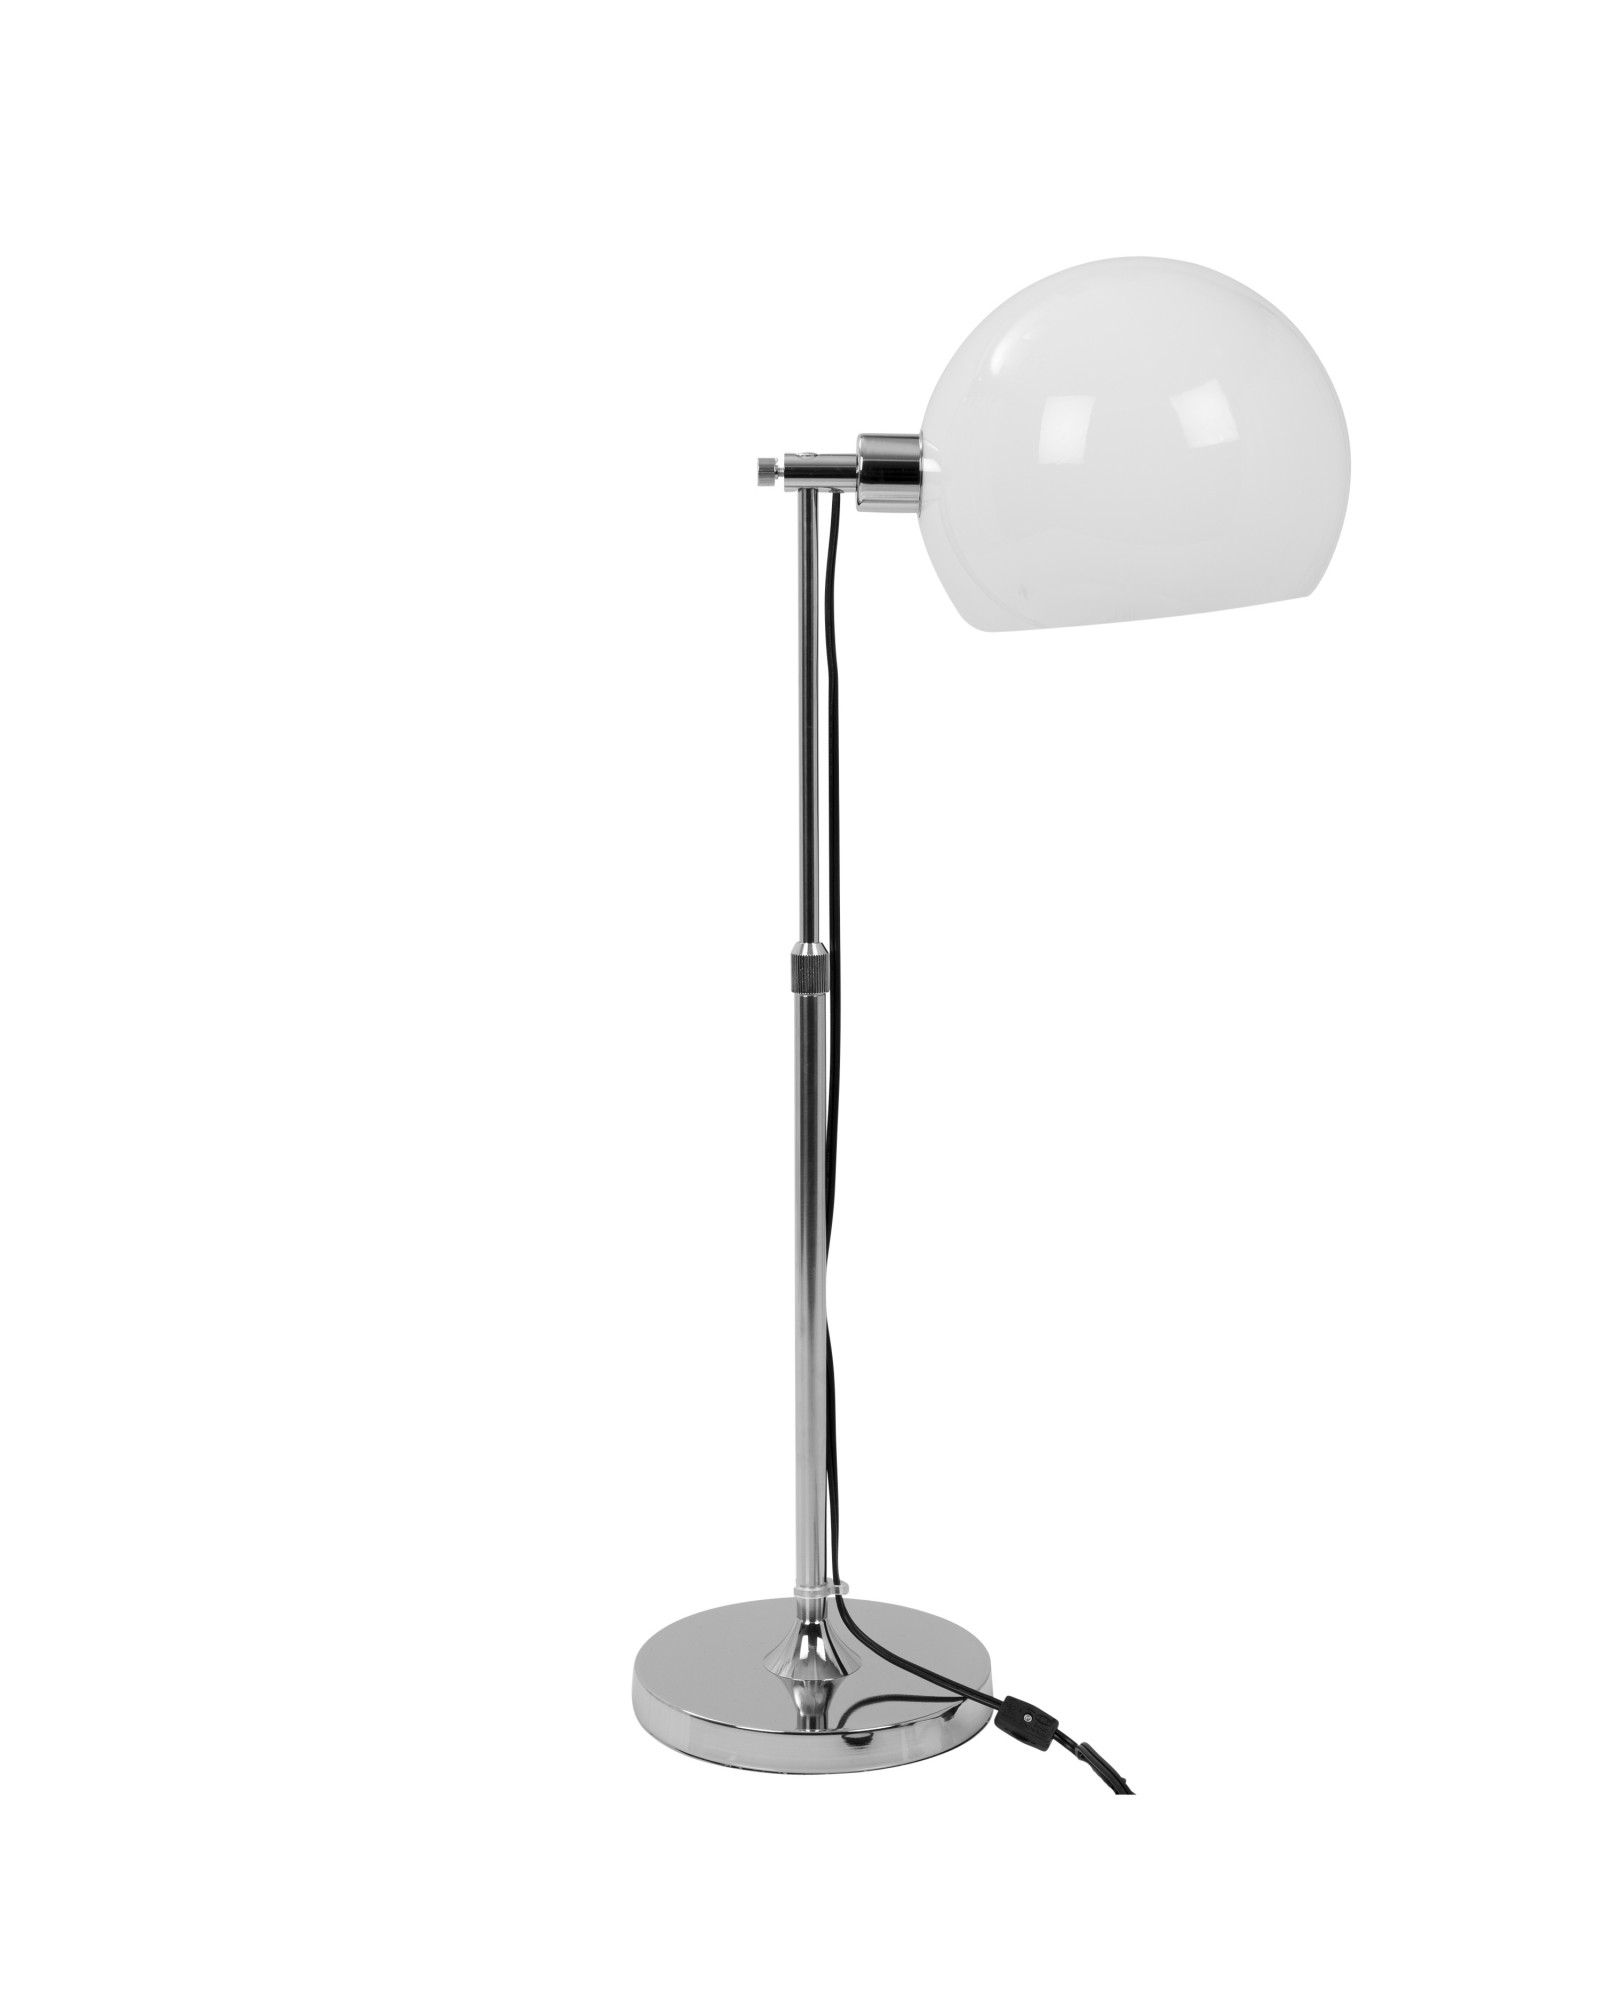 Decco Contemporary Adjustable Table Lamp in Chrome with White Shade